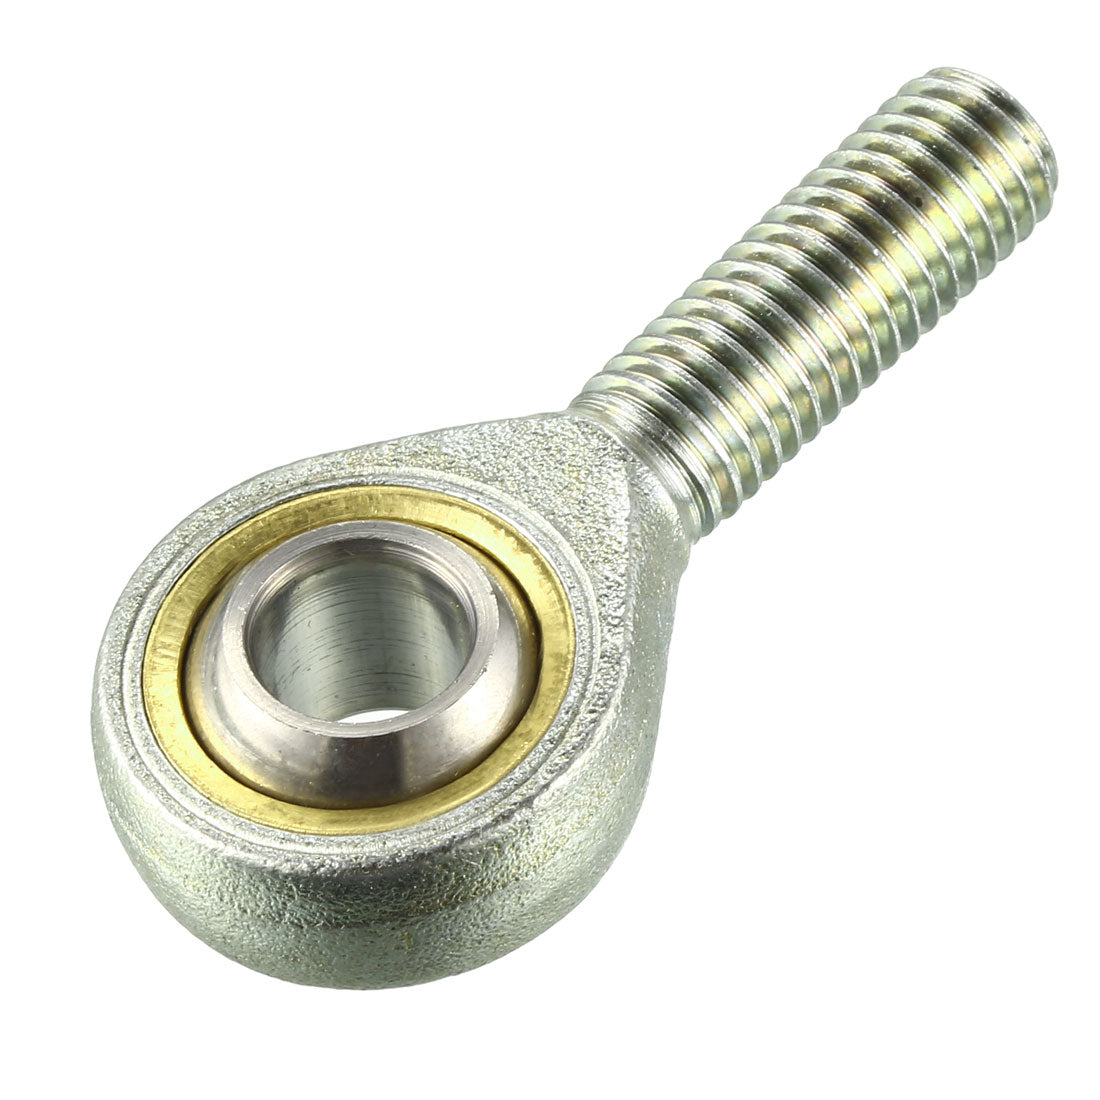 uxcell Uxcell 12mm Rod End Bearing M12x1.75mm Rod Ends Ball Joint Male Right Hand Thread